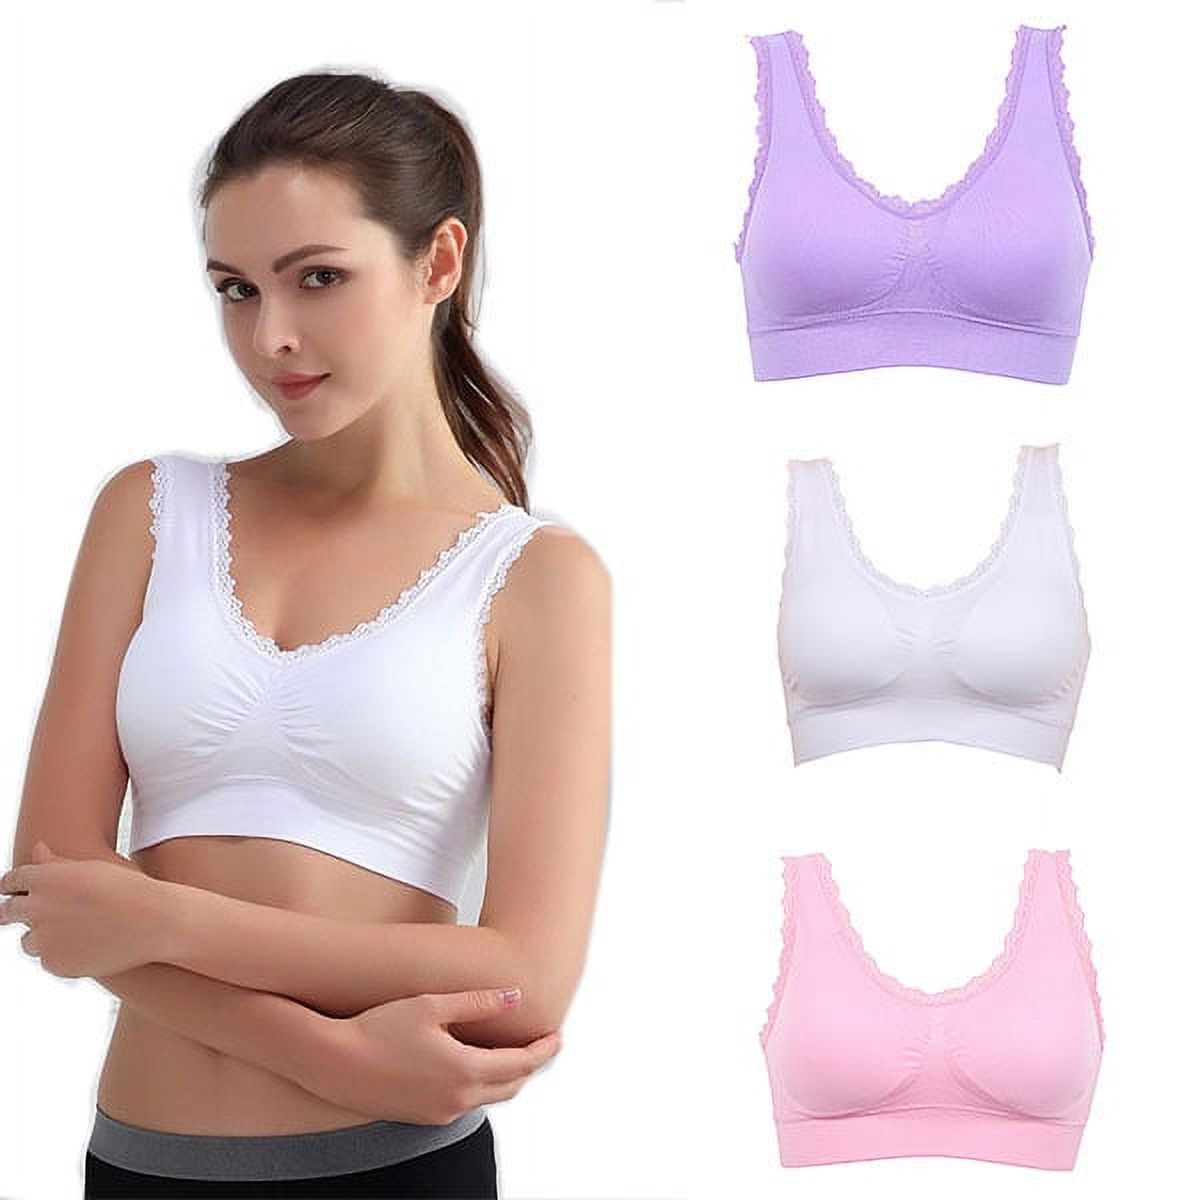 Women Sports Summer Bra Padded Bra Lace Crop Top Stretch Fitness Gym Yoga Outdoor Athletic Vest Black XL - image 3 of 11